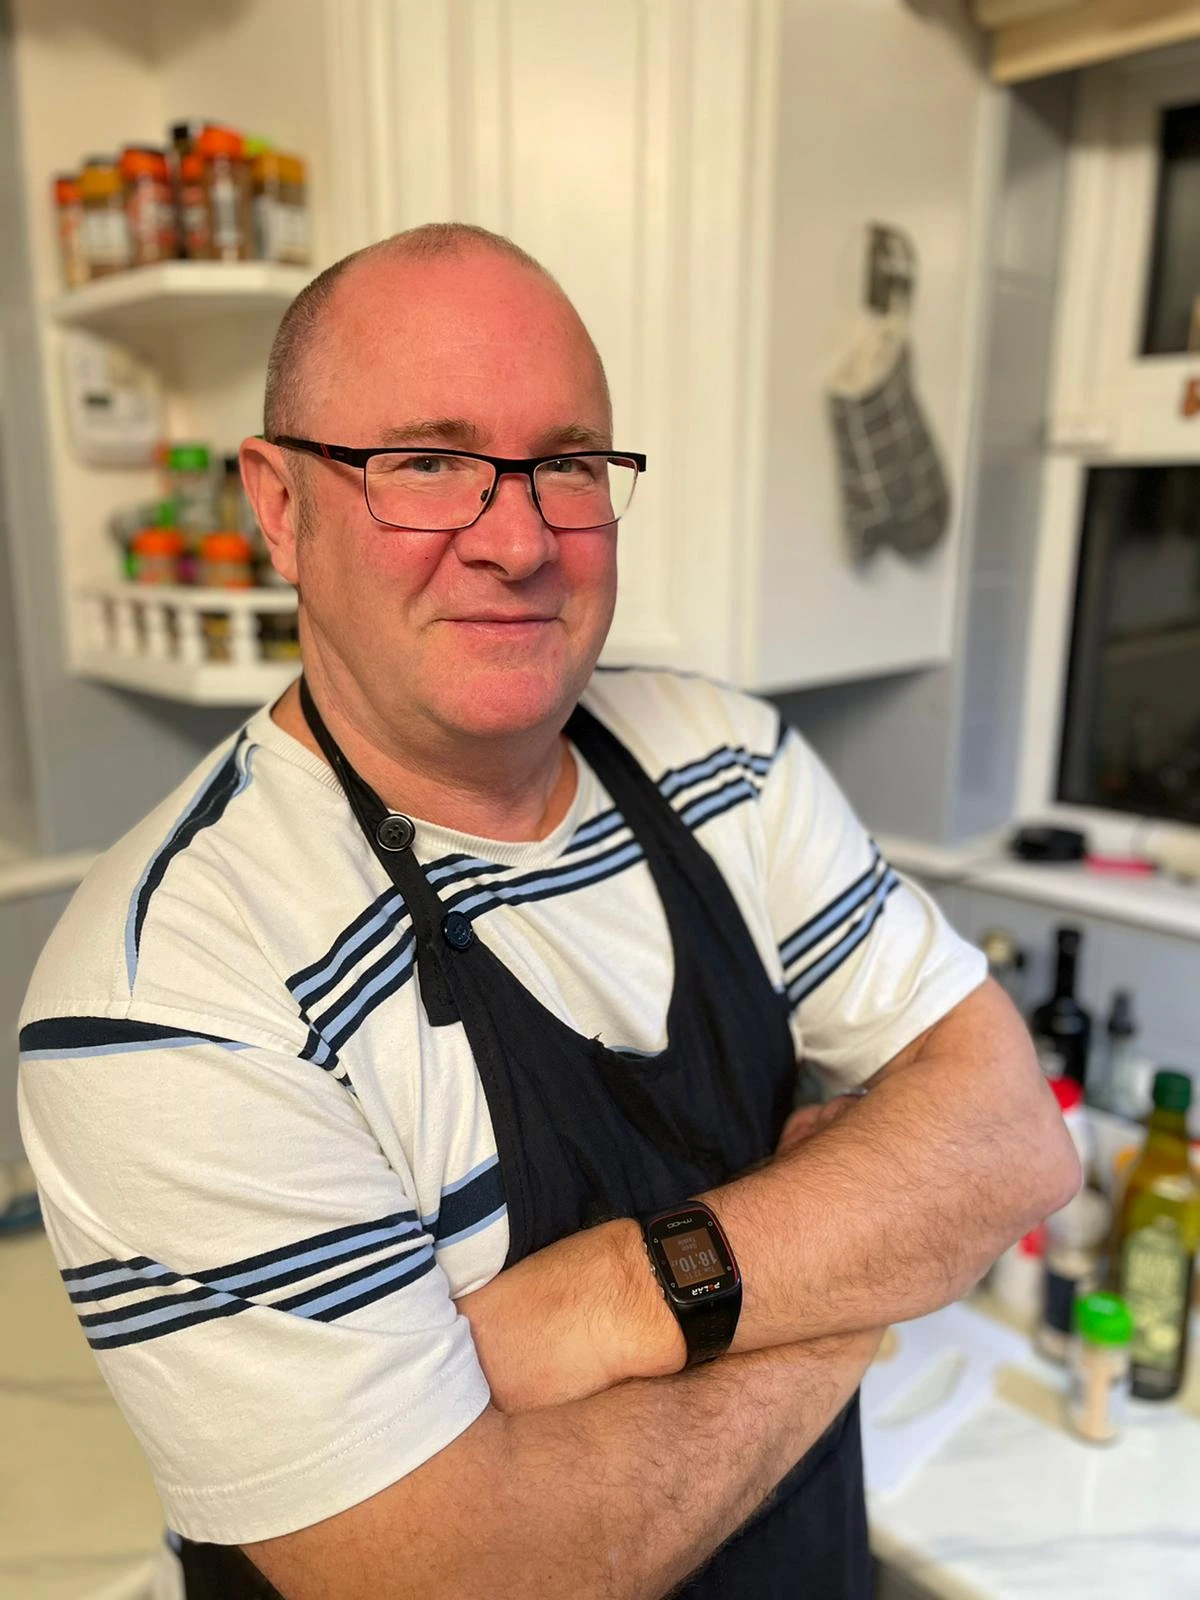 Photograph of Gav in his kitchen with arms crossed.